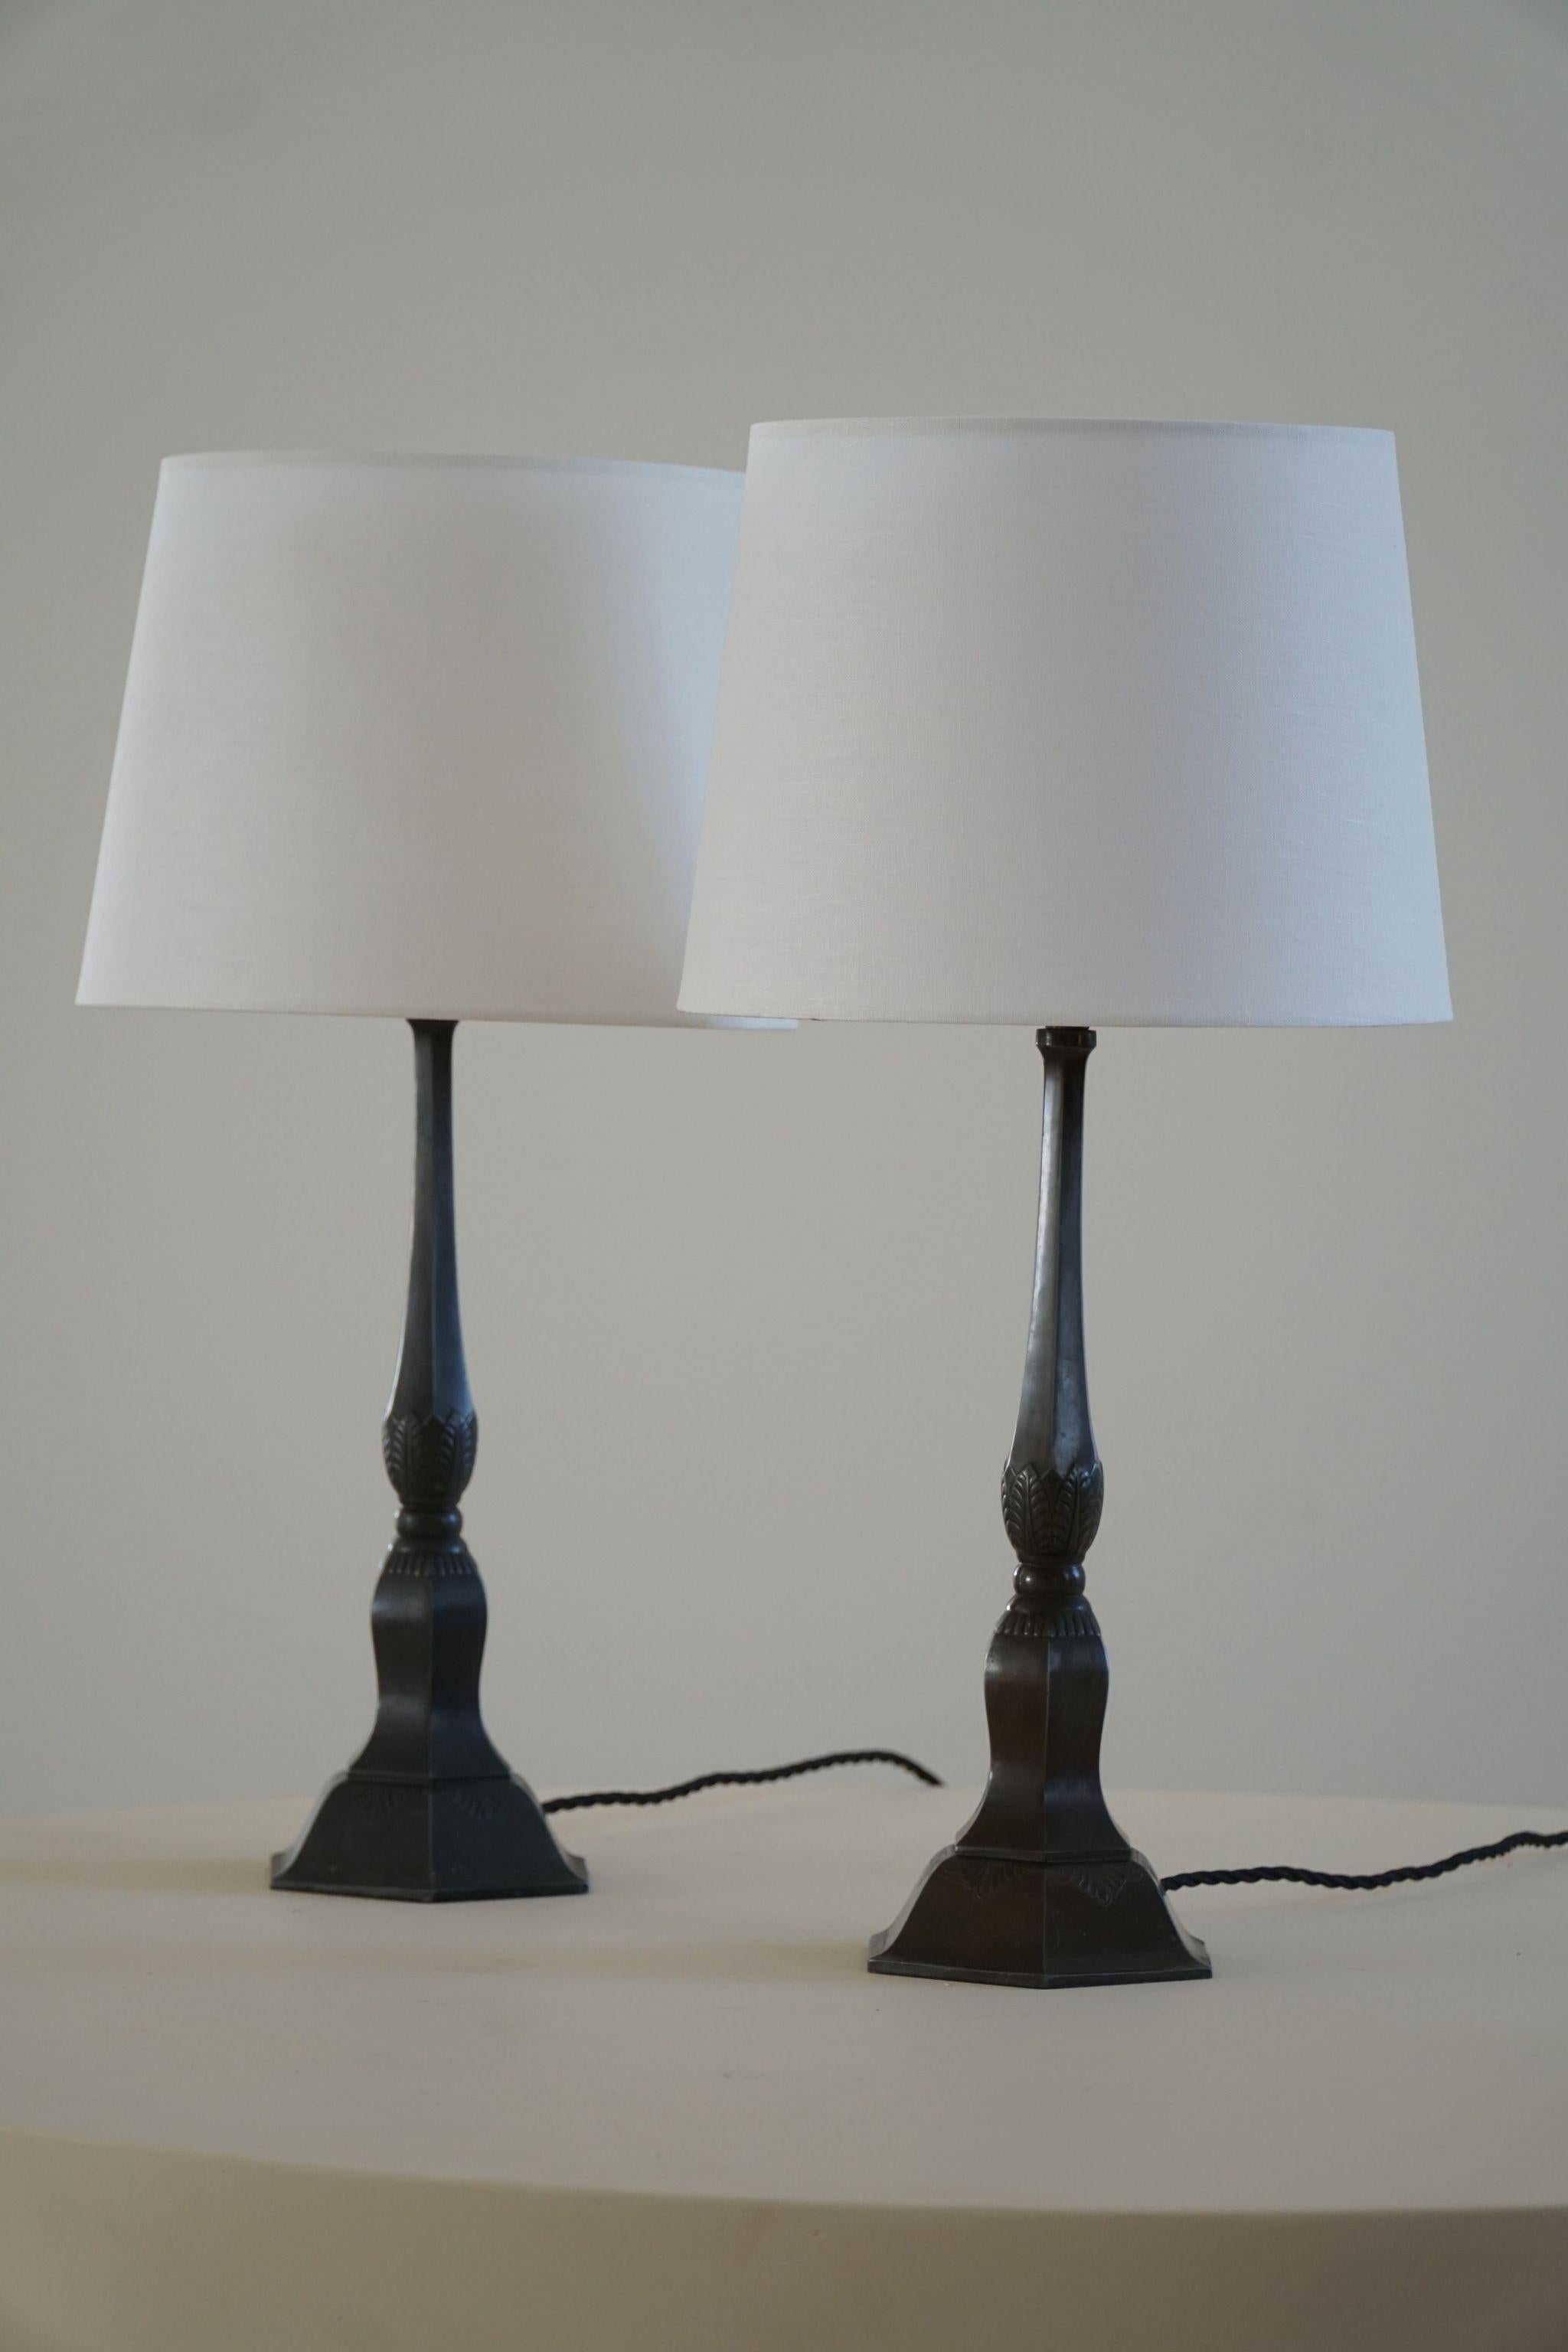 A Pair of Danish Modern Table Lamps from Just Andersen in Diskometal, 1920s For Sale 4